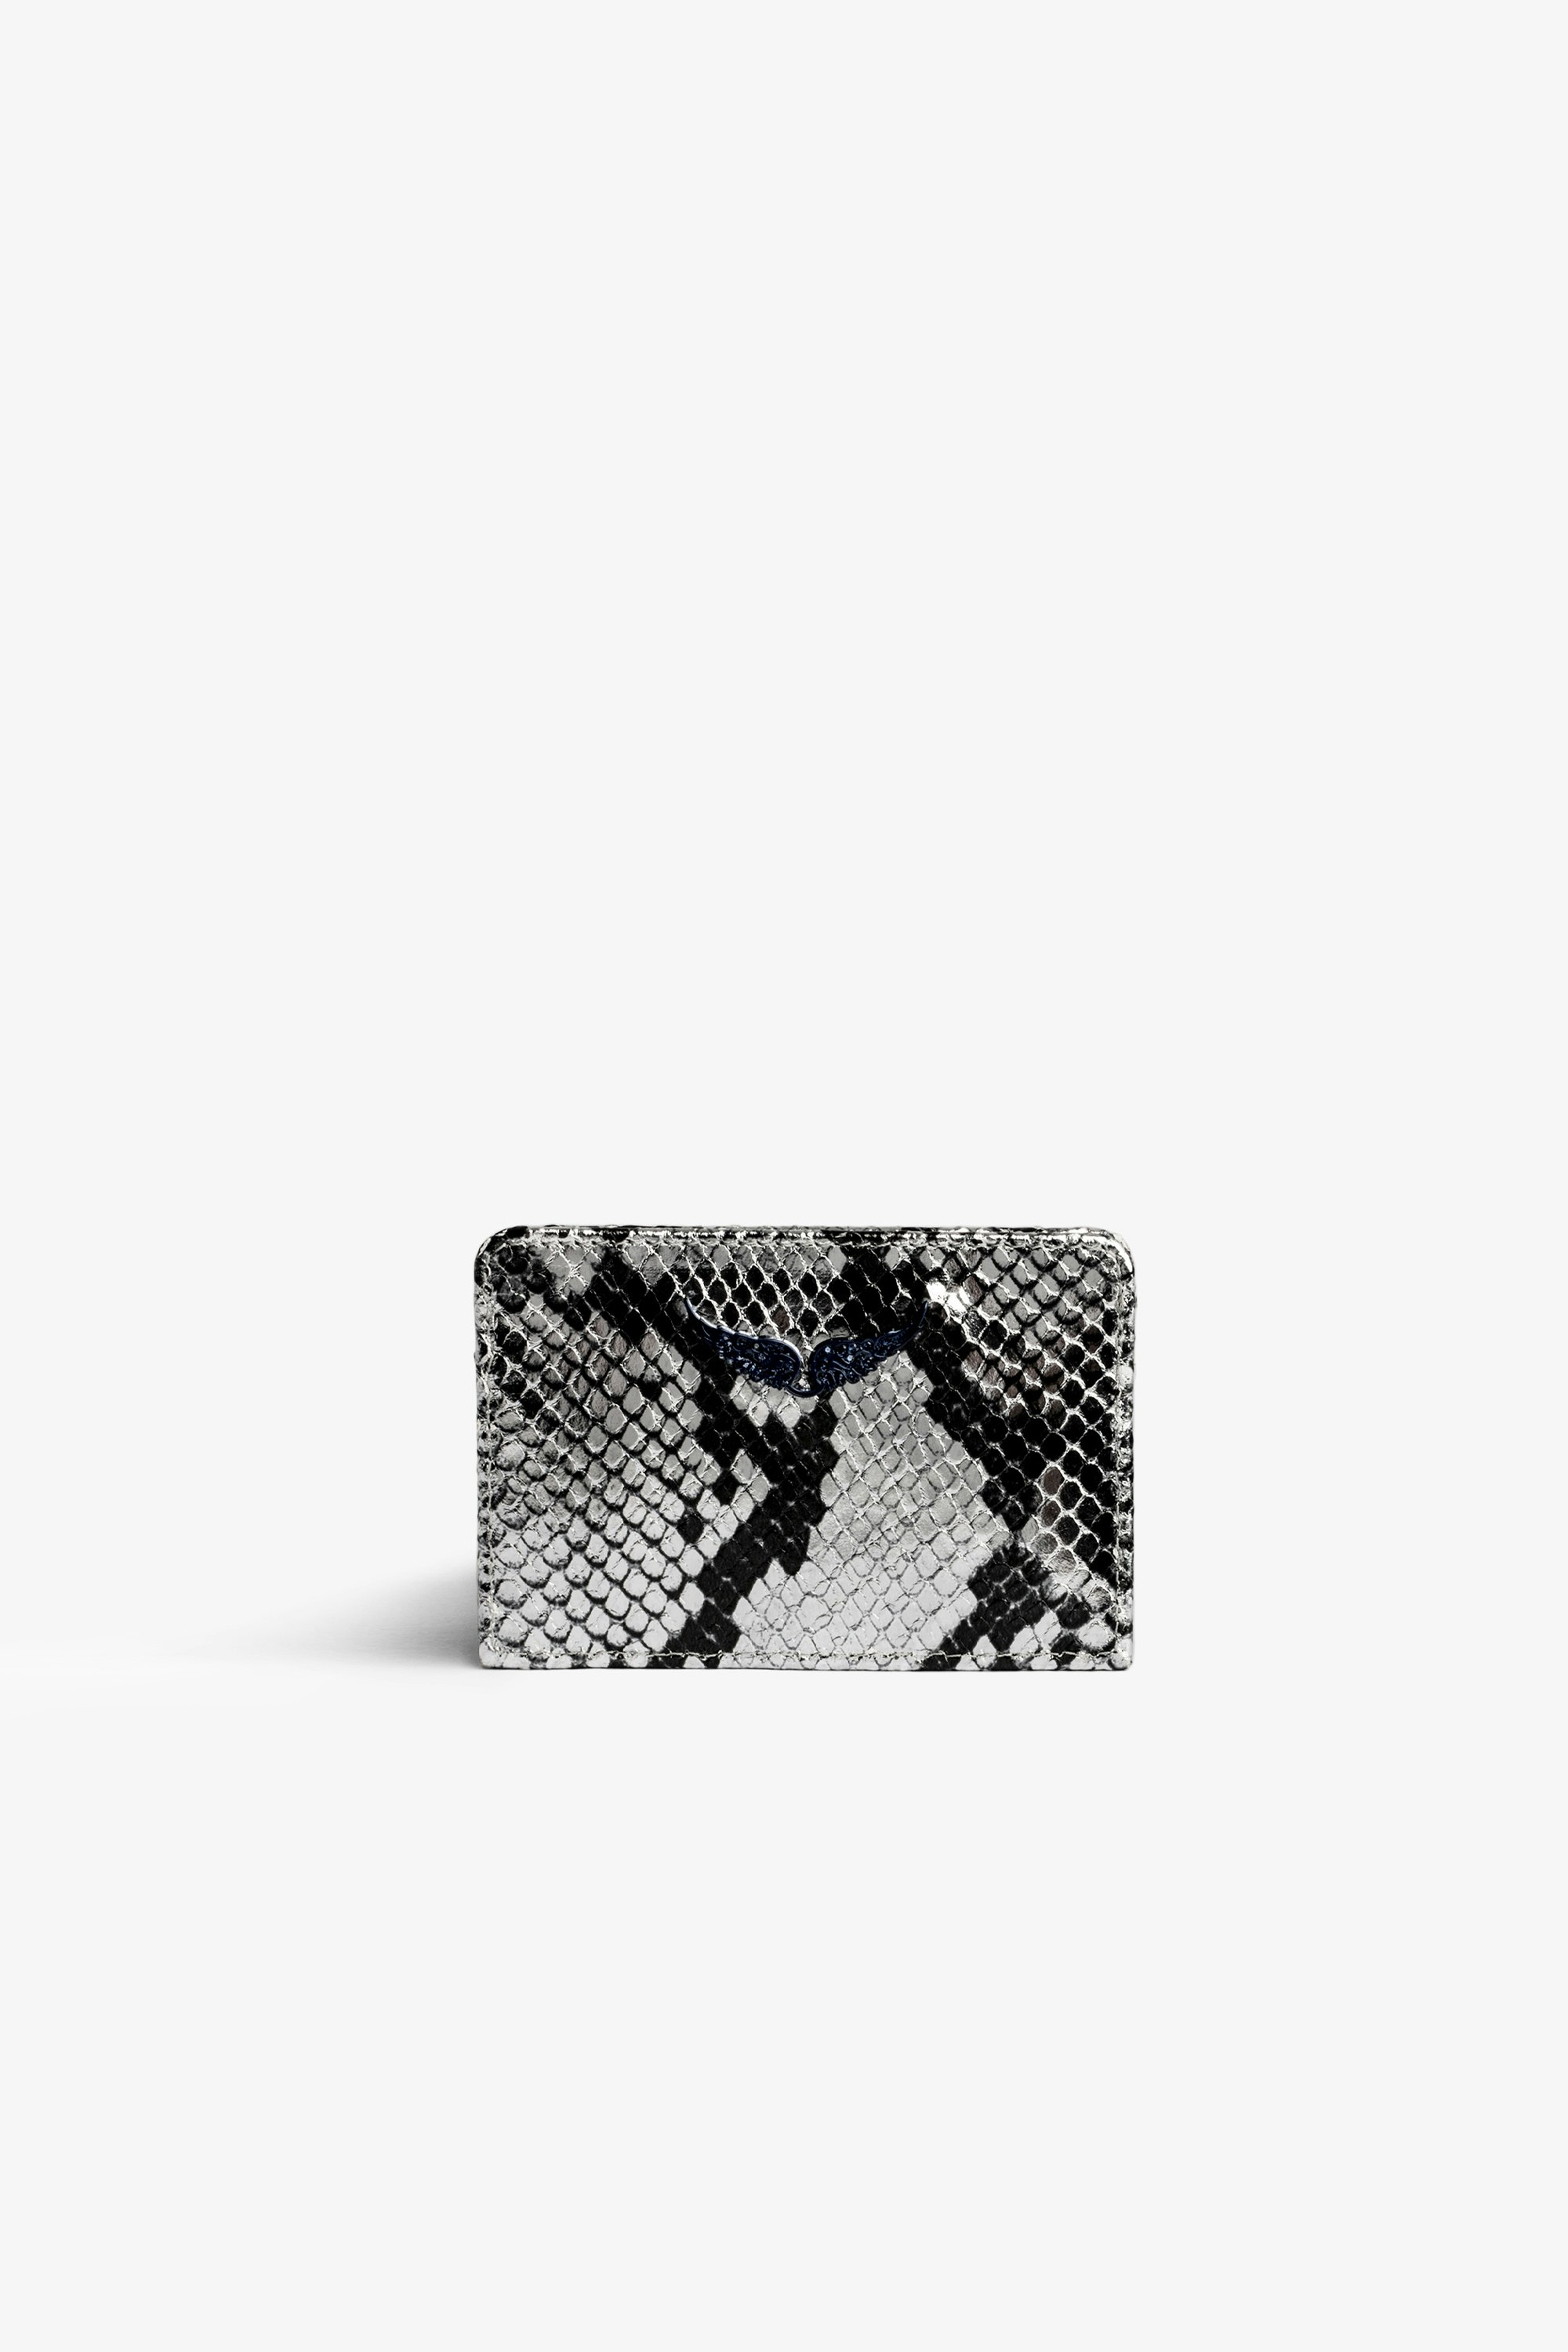 ZV Pass Card Holder Women’s silver metallic snake-embossed leather card holder with crystal-embellished wings charm